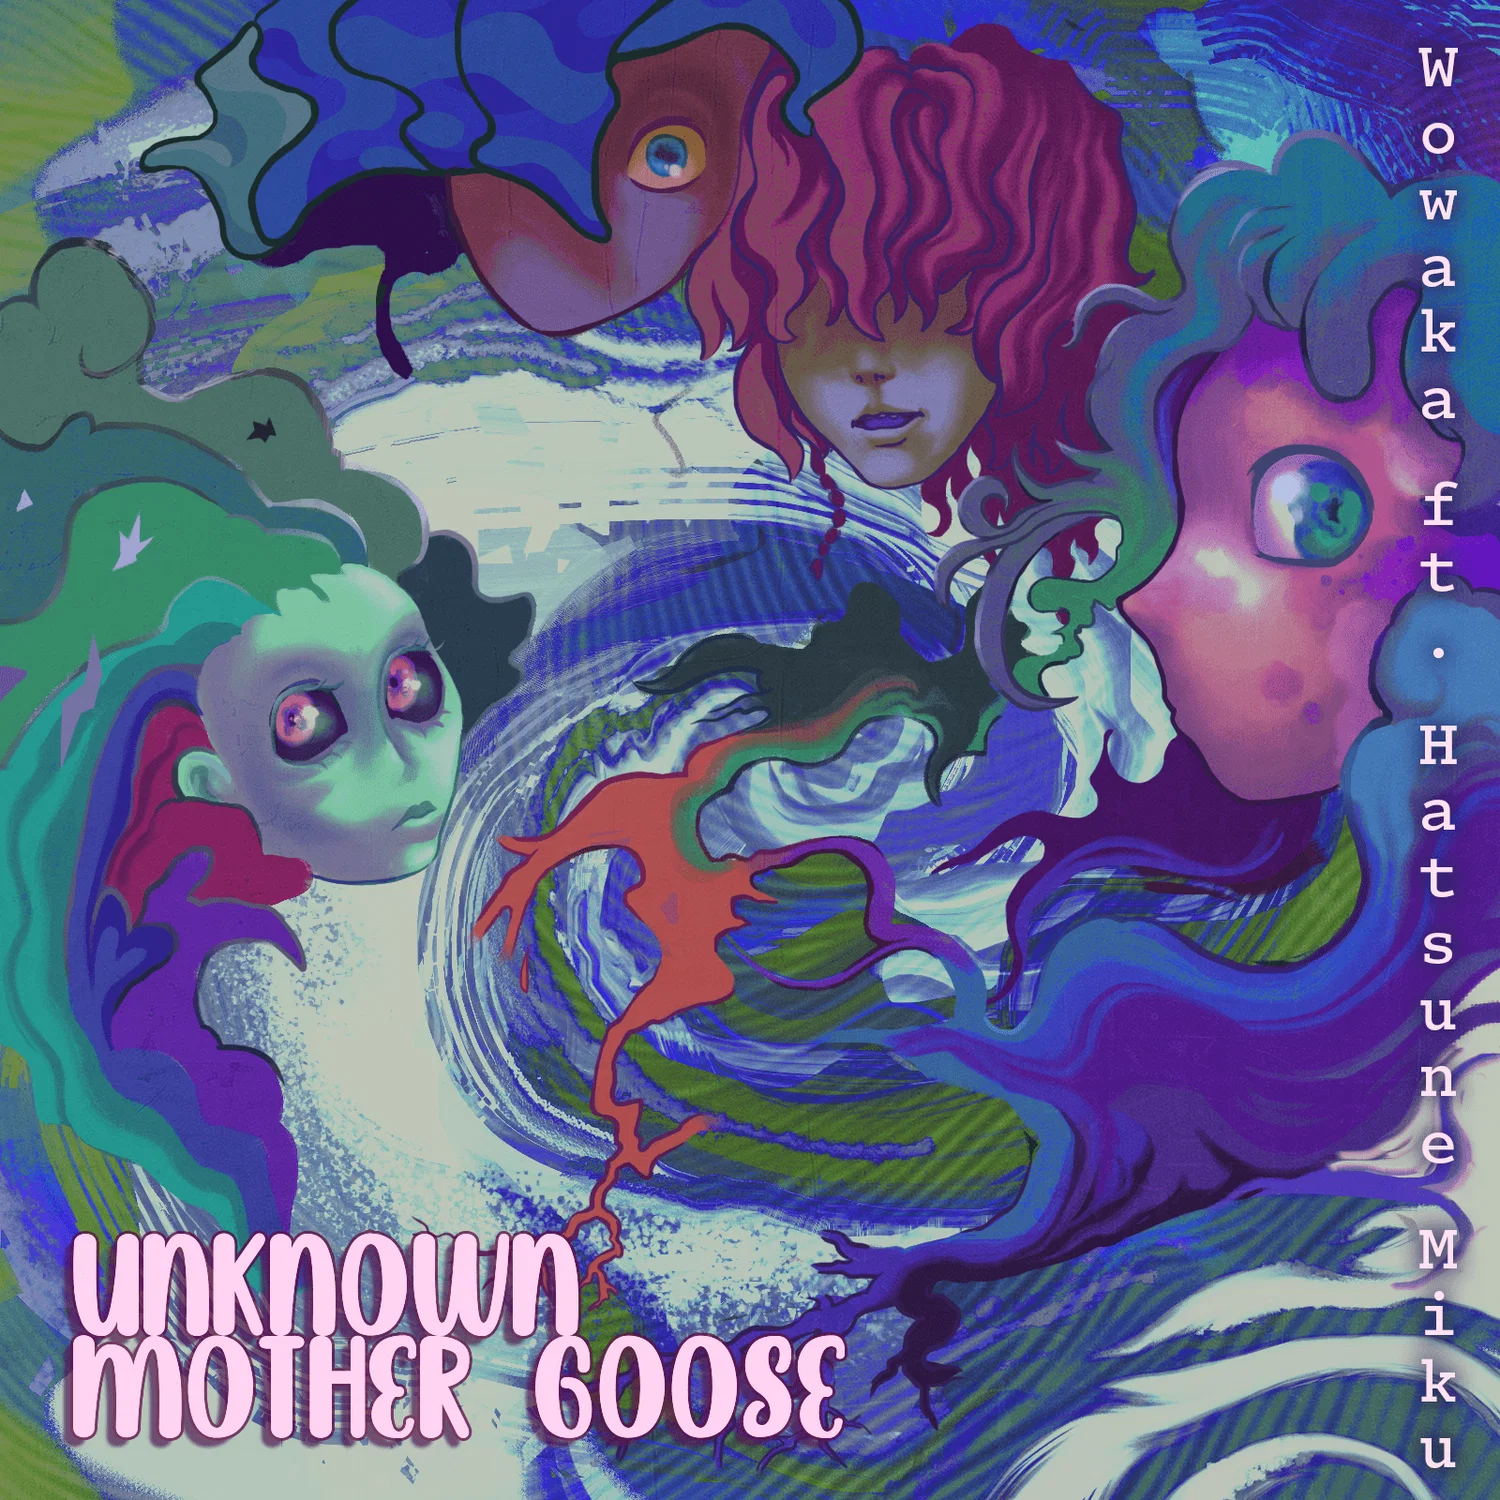 A digital album cover illustration. Four colorful floating heads are depicted in front of a spiral shape in the background. The text reads "Unknown Mother Goose" and "wowaka ft. Hatsune Miku"